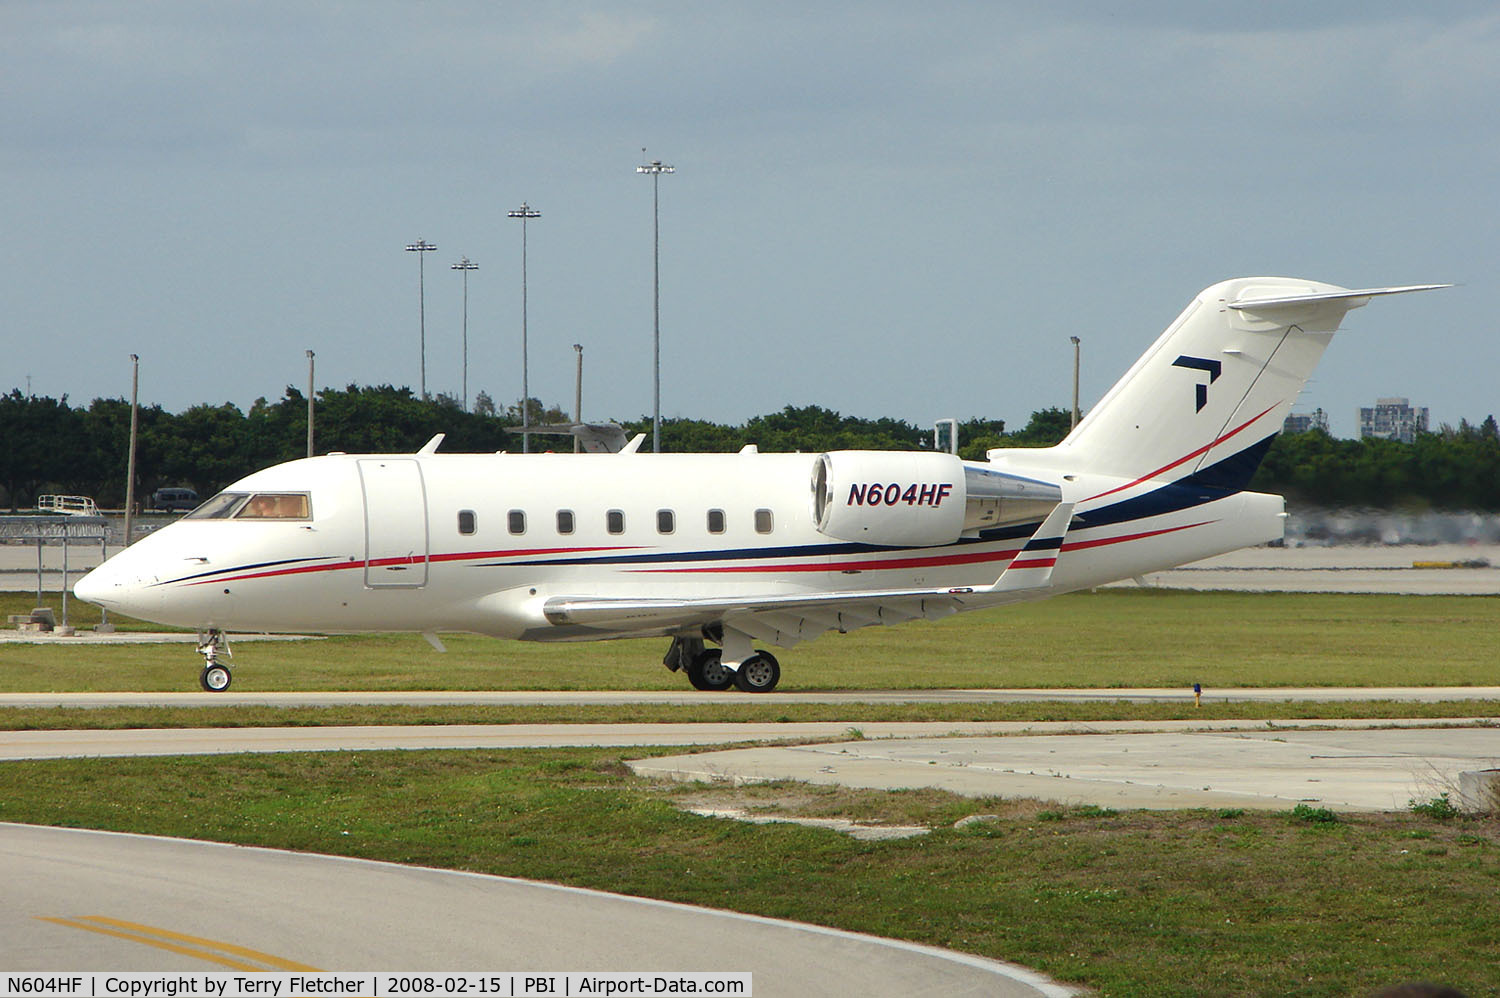 N604HF, 2003 Bombardier Challenger 604 (CL-600-2B16) C/N 5575, The business aircraft traffic at West Palm Beach on the Friday before President's Day always provides the aviation enthusiast / photographer with a treat